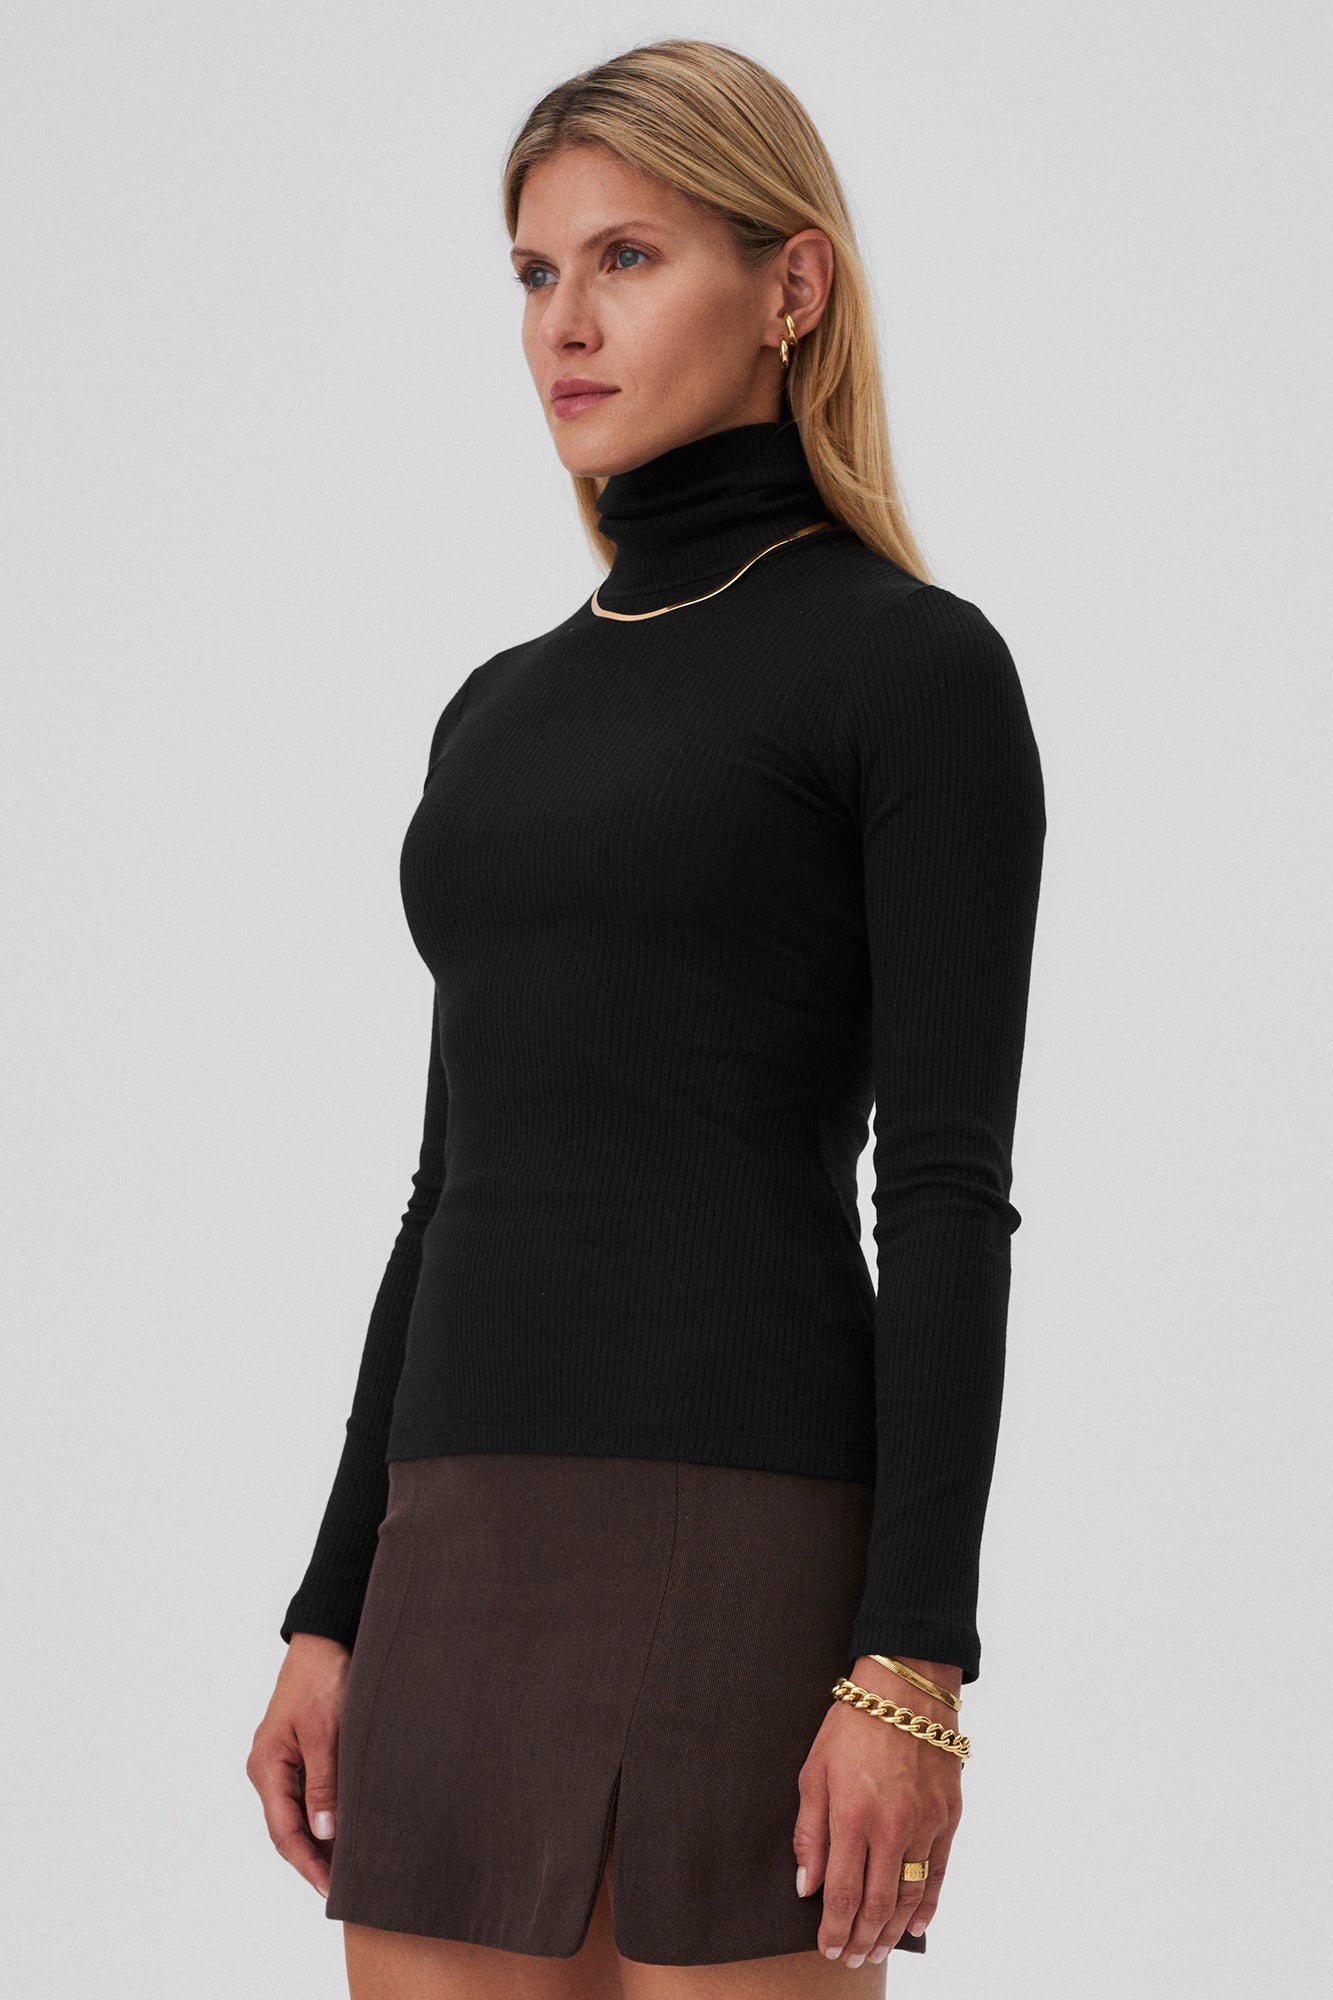 Turtleneck in organic cotton / 15 / 02 / onyx black *tencel-skirt-07-02-dark-chocolate* ?The model is 177cm tall and wears size S? |